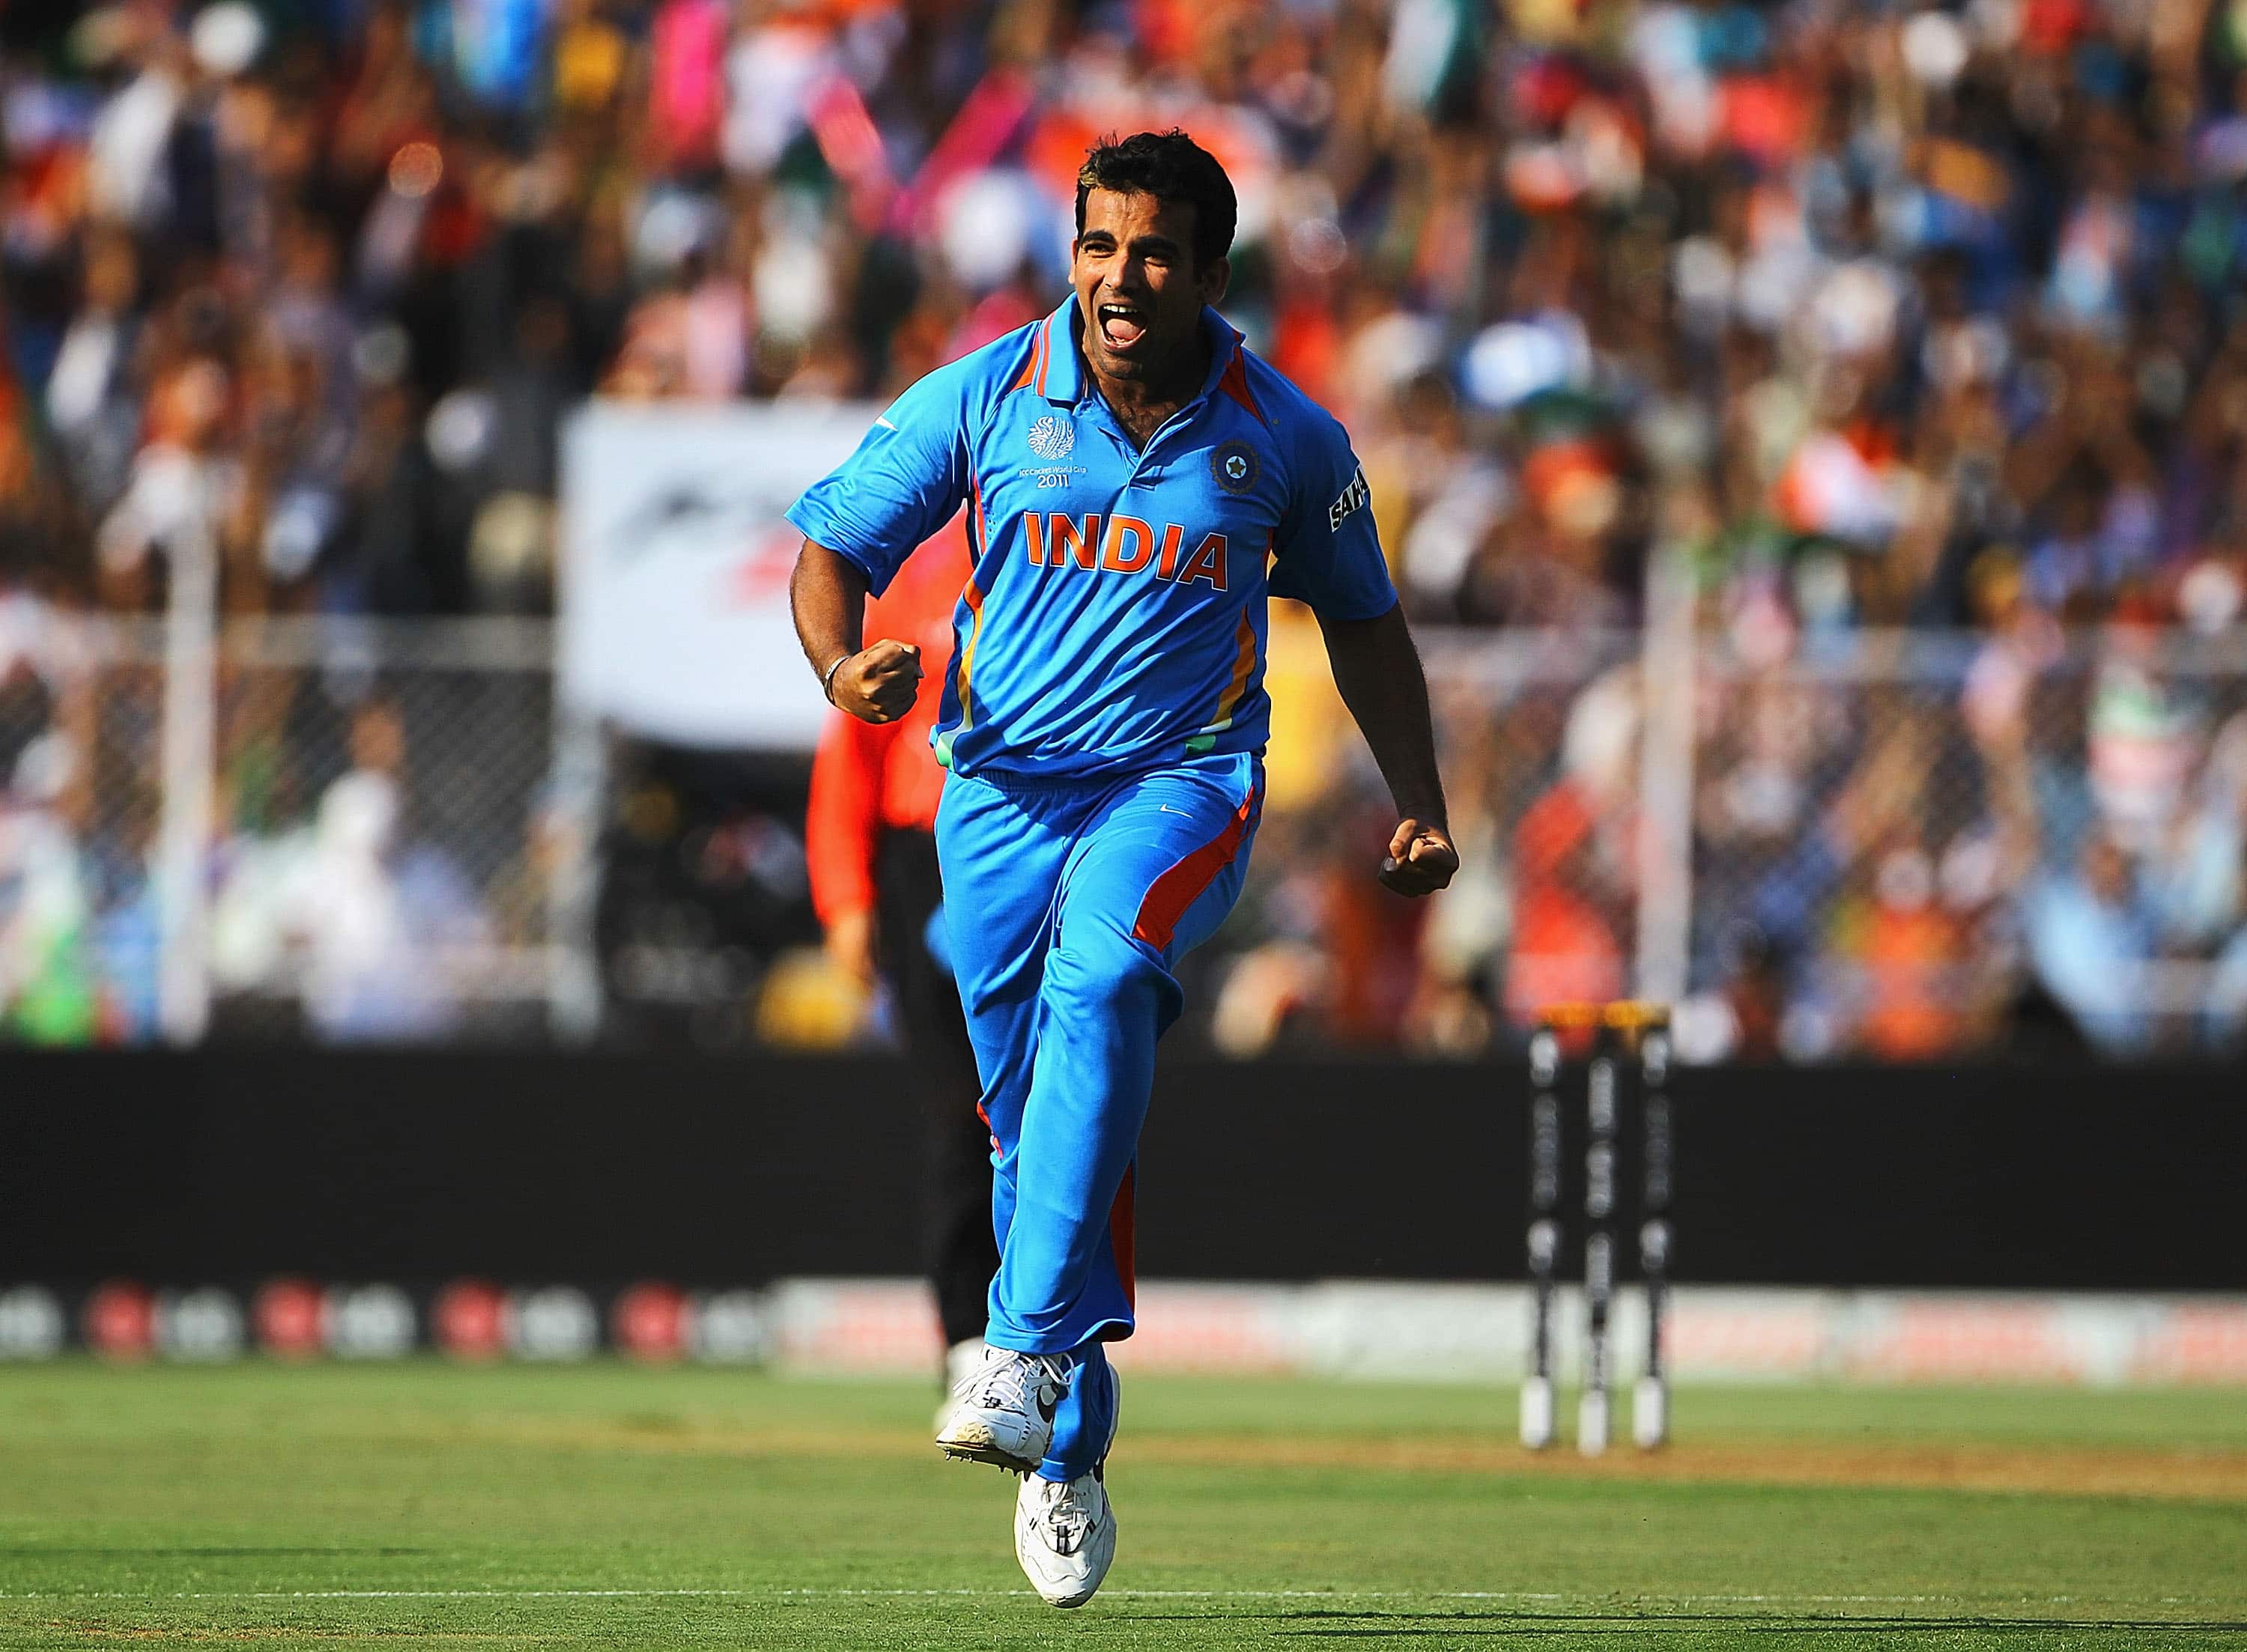 Zaheer Khan India will take advantage of home conditions and win the